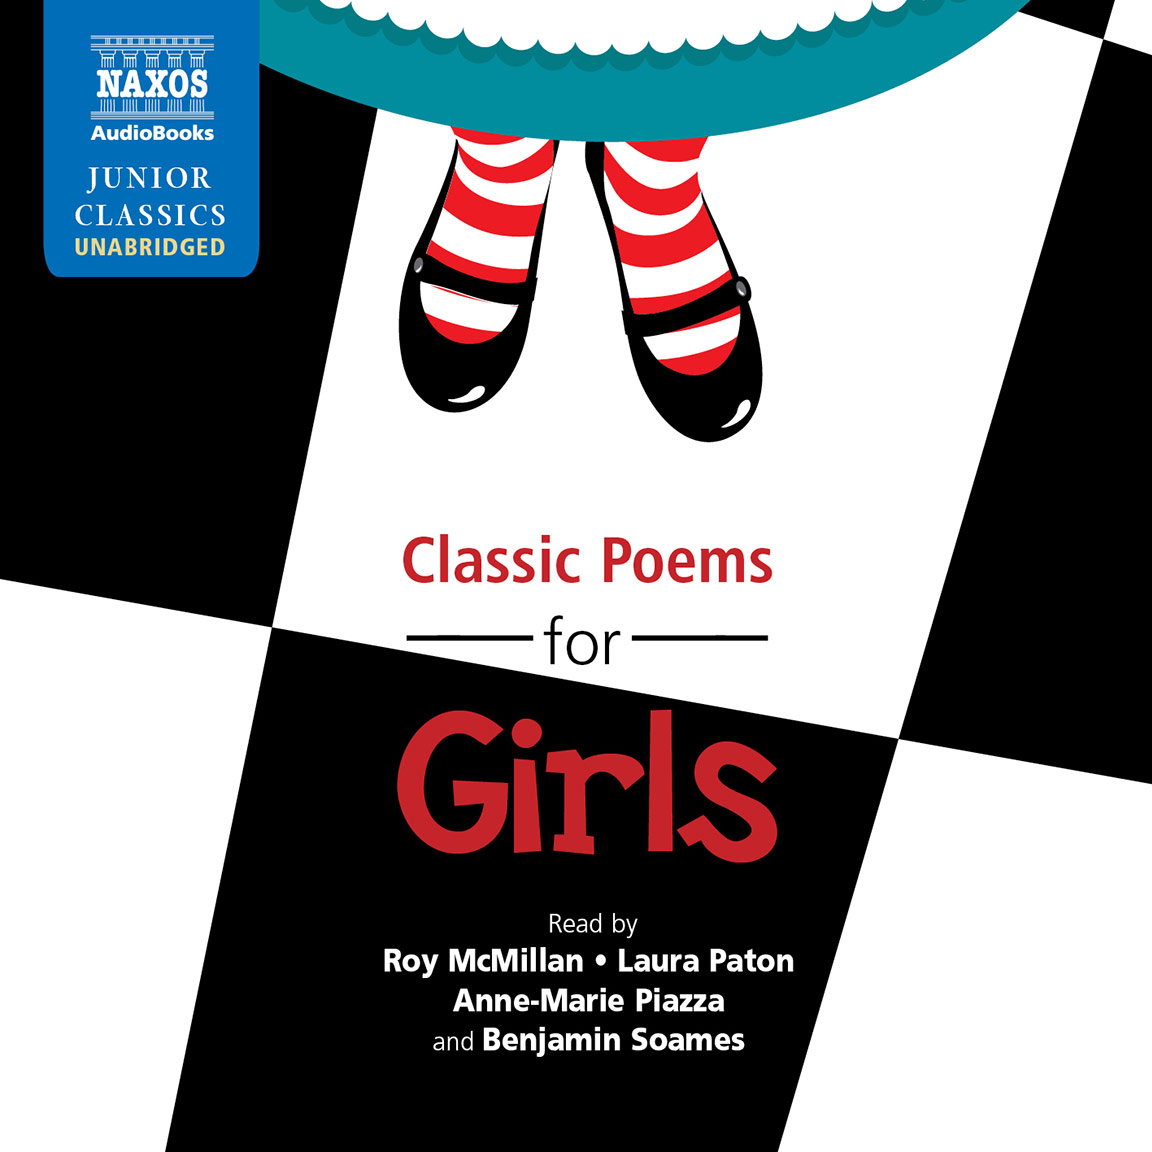 Classic Poems for Girls (unabridged)